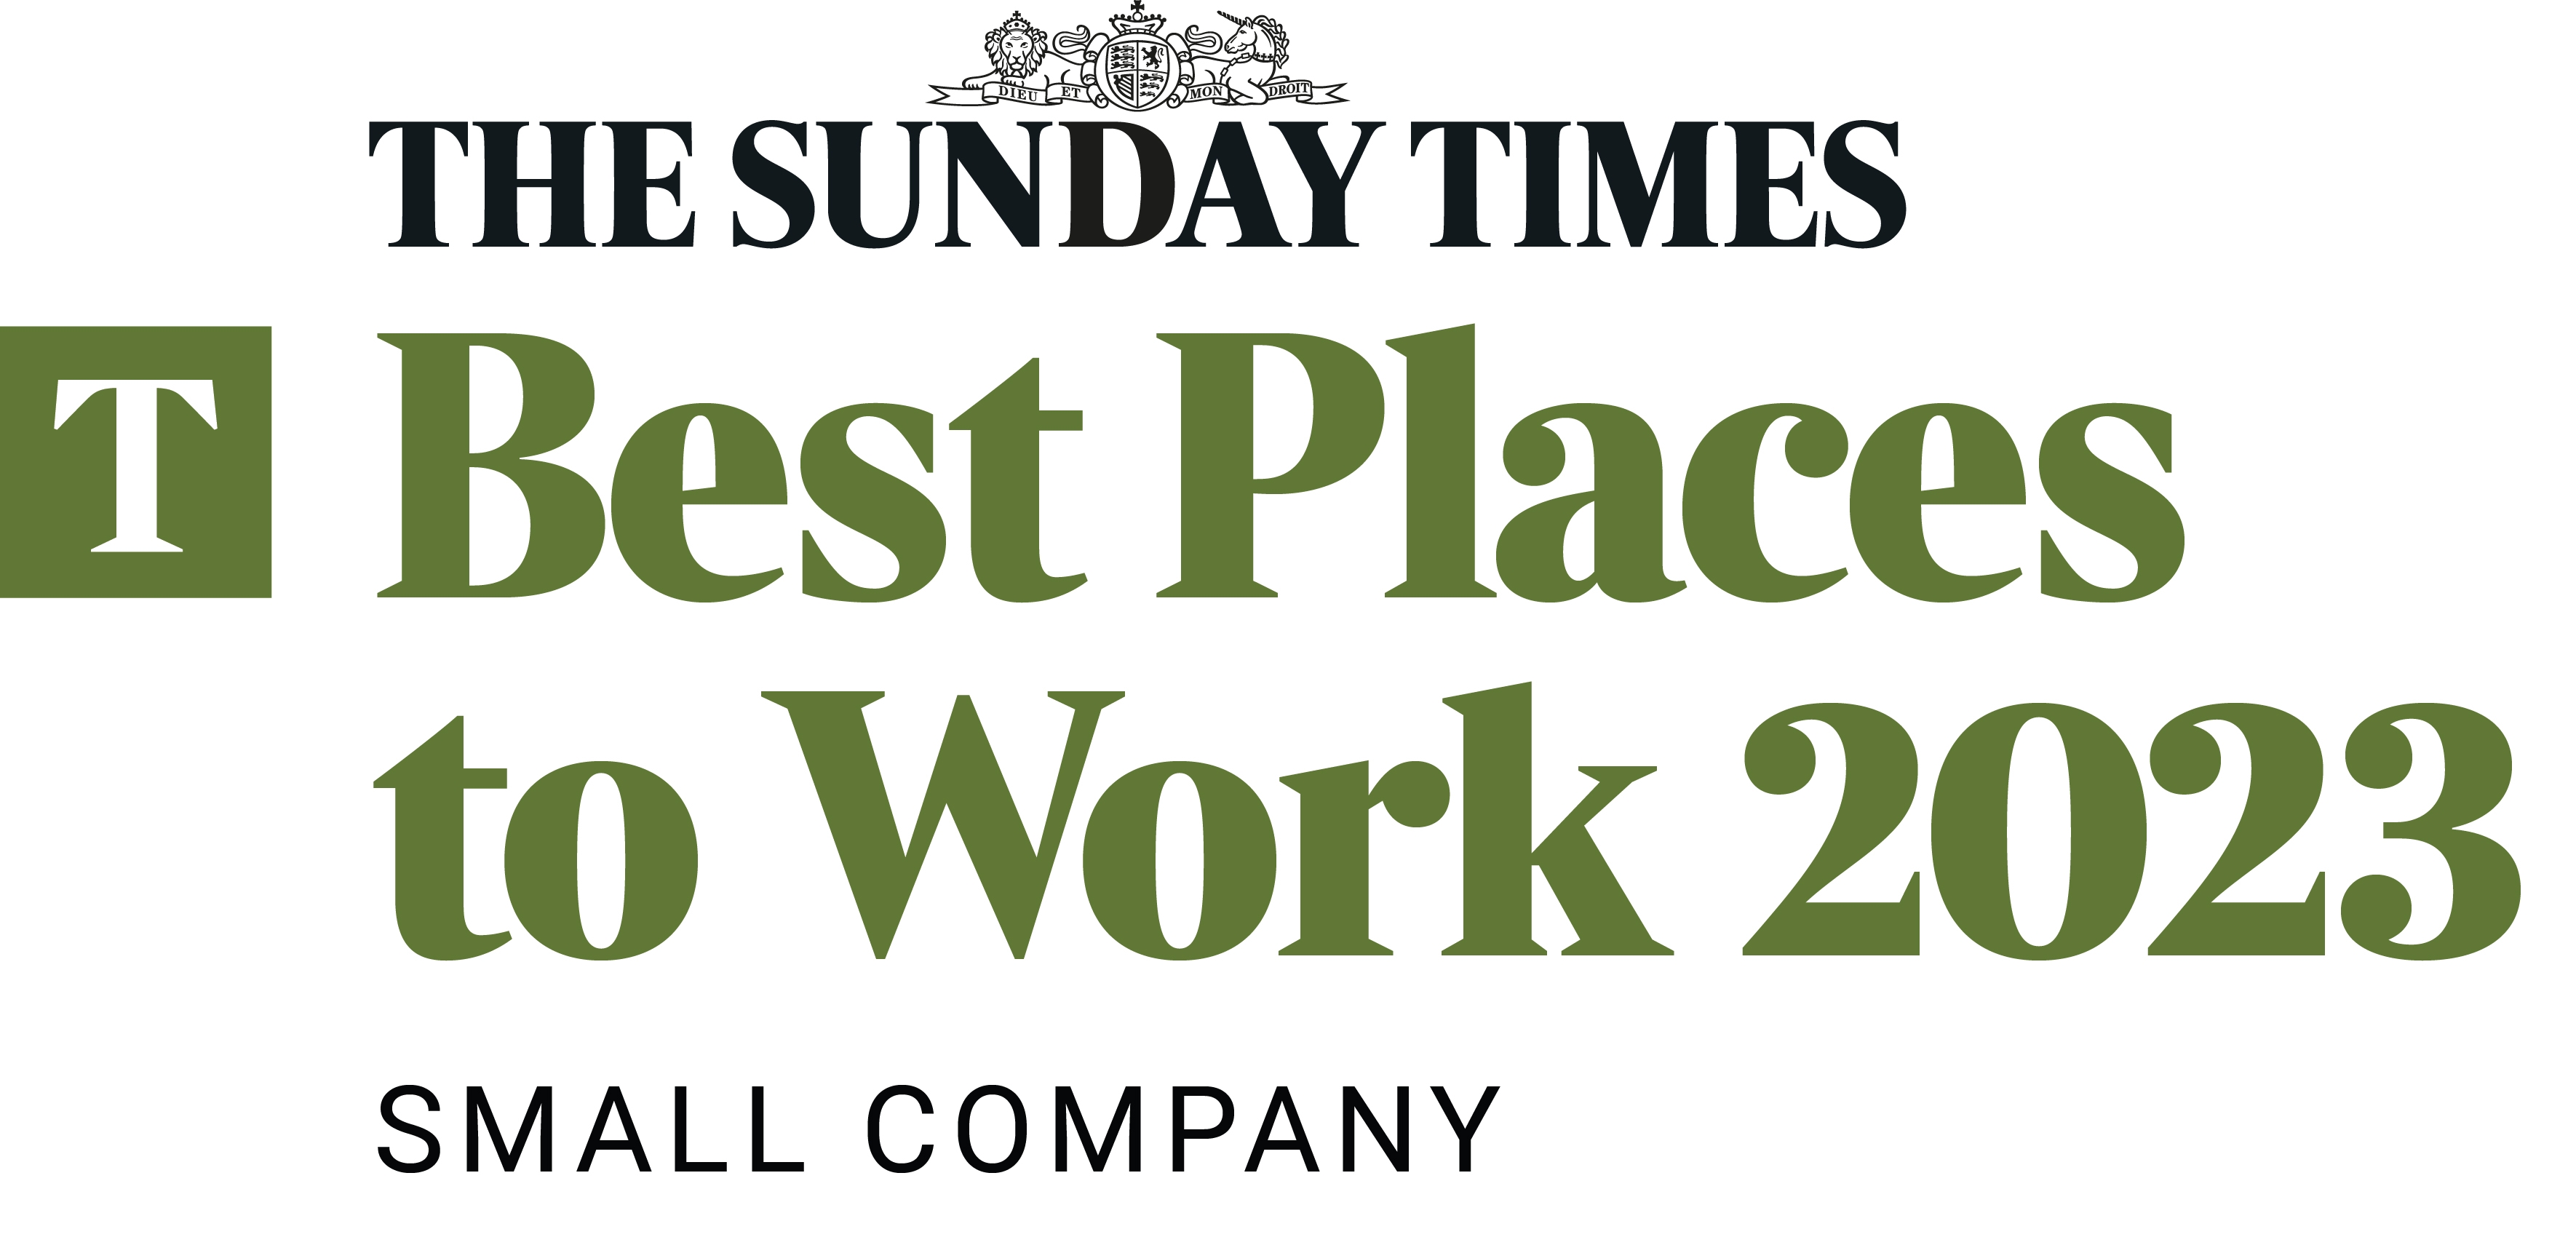 The Sunday Times Best Places to Work 2023